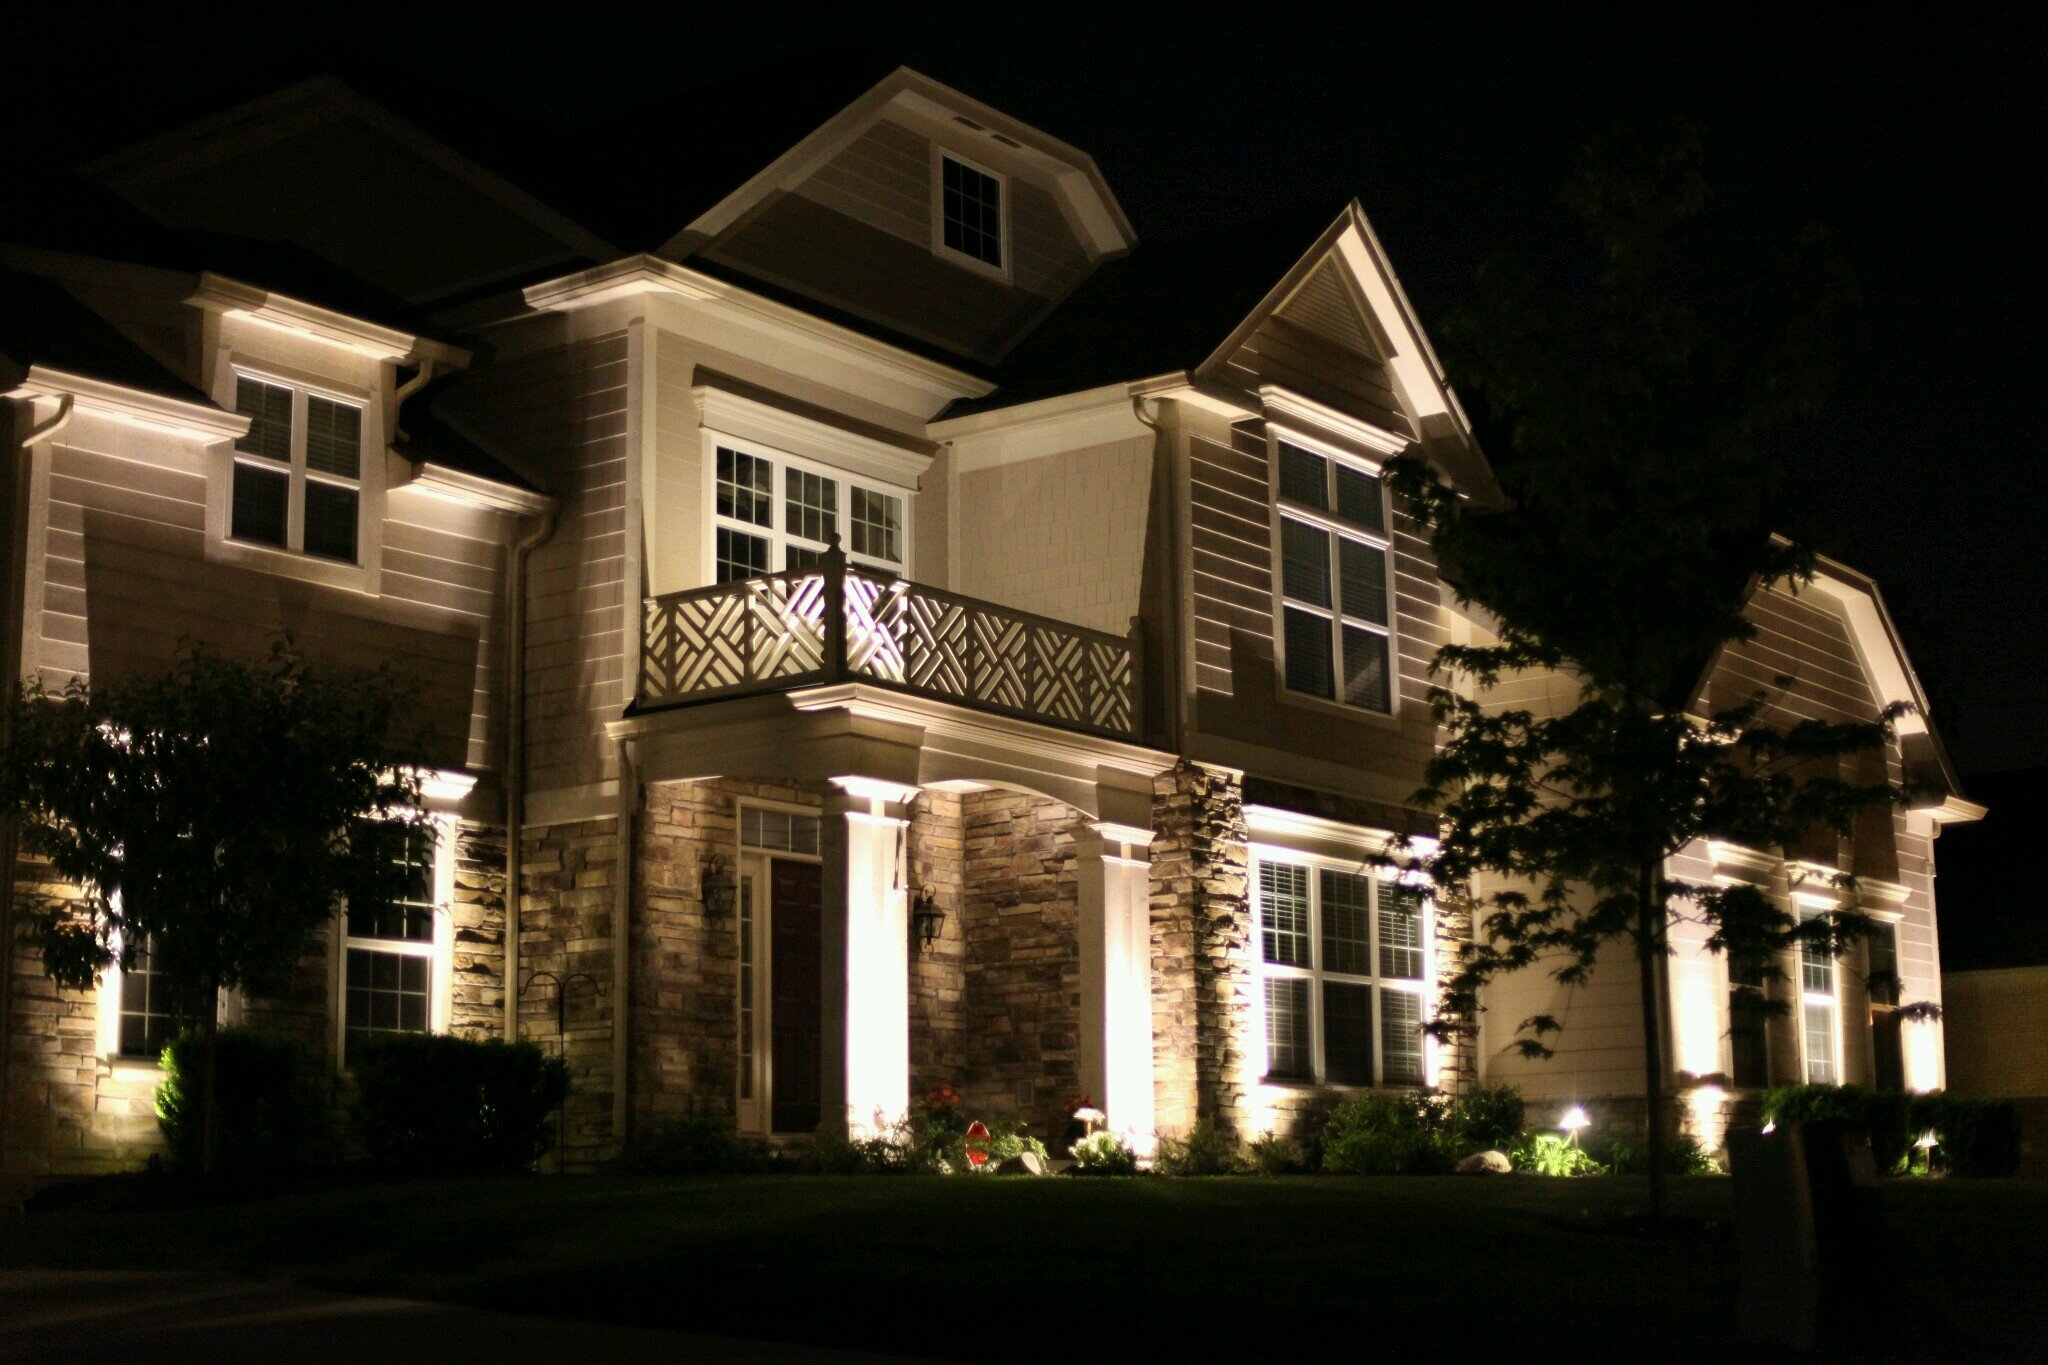 Indiana's professional outdoor landscape lighting expert. Specializing in LED lighting installation and maintenance.